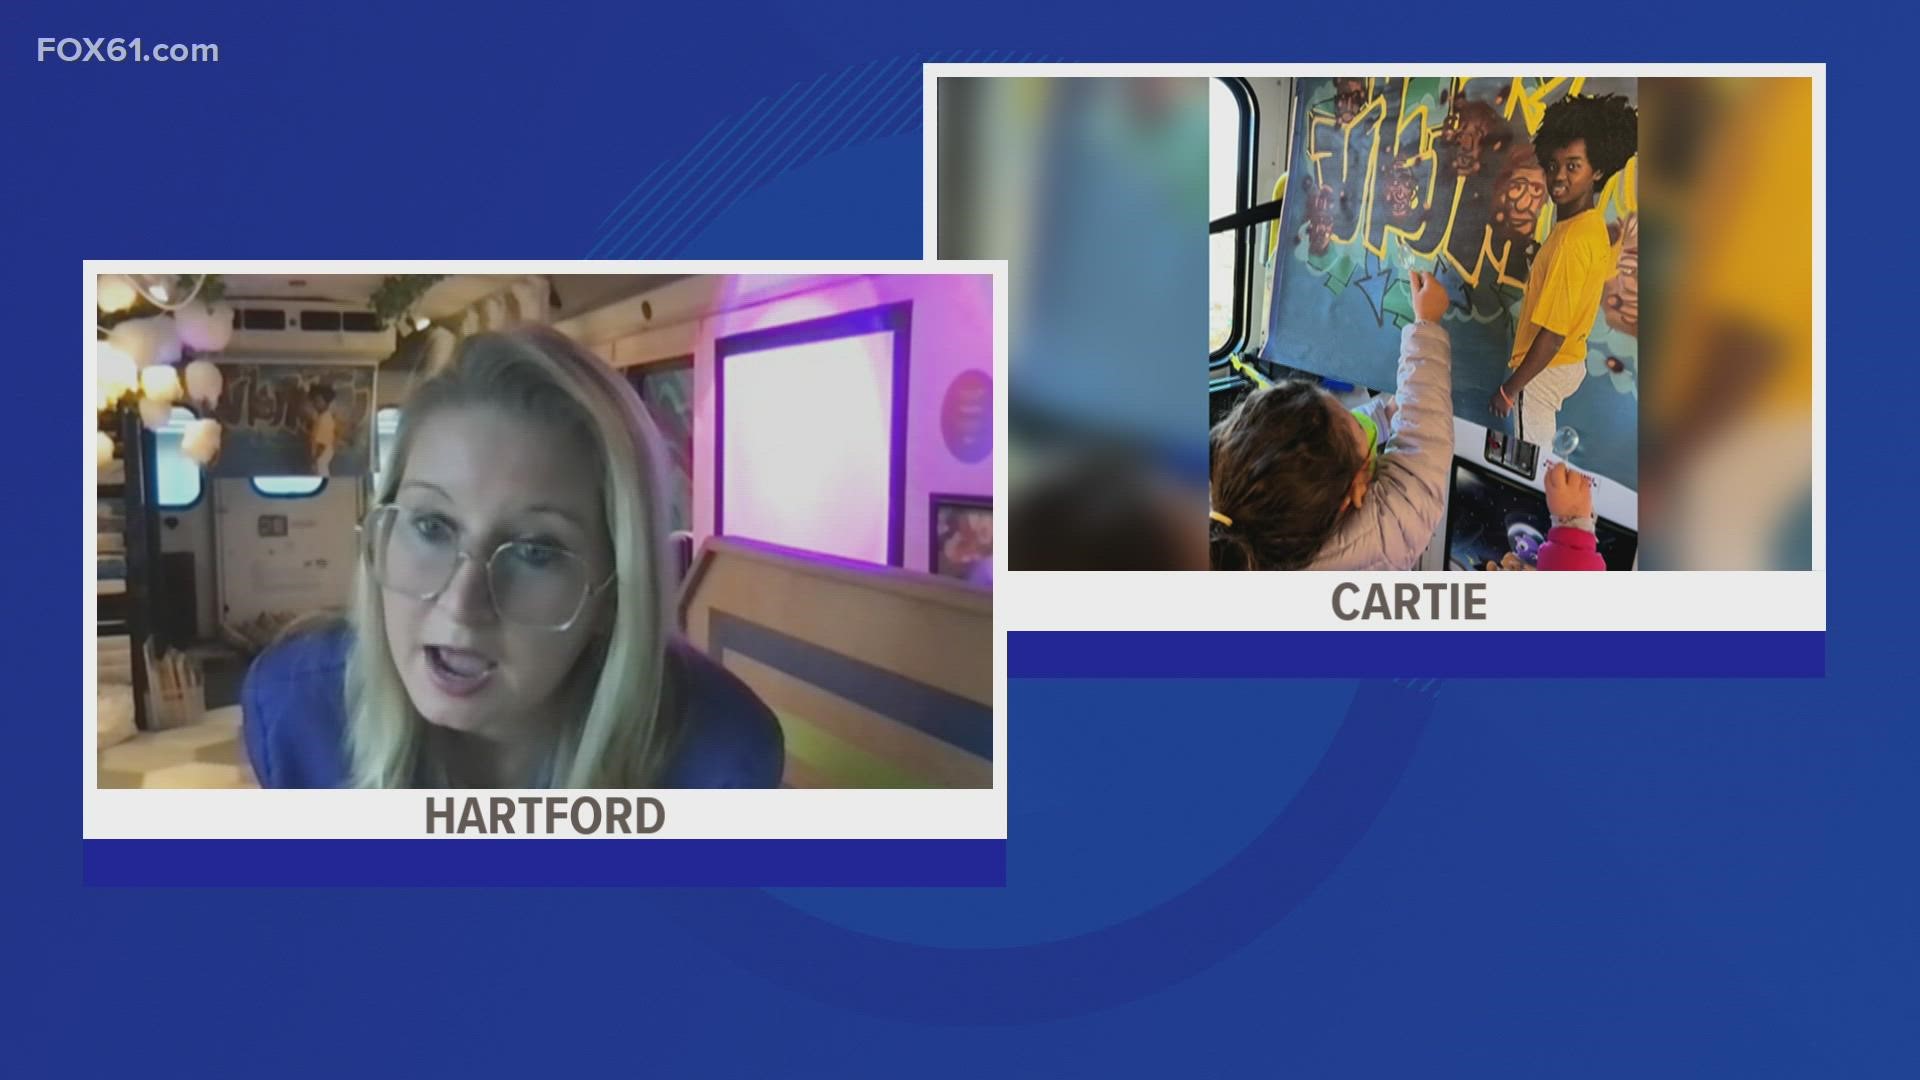 FOX61 speaks to Clare Murray, the co-founder and executive director of cARTie. The bus is the state's first and only nonprofit mobile art museum.